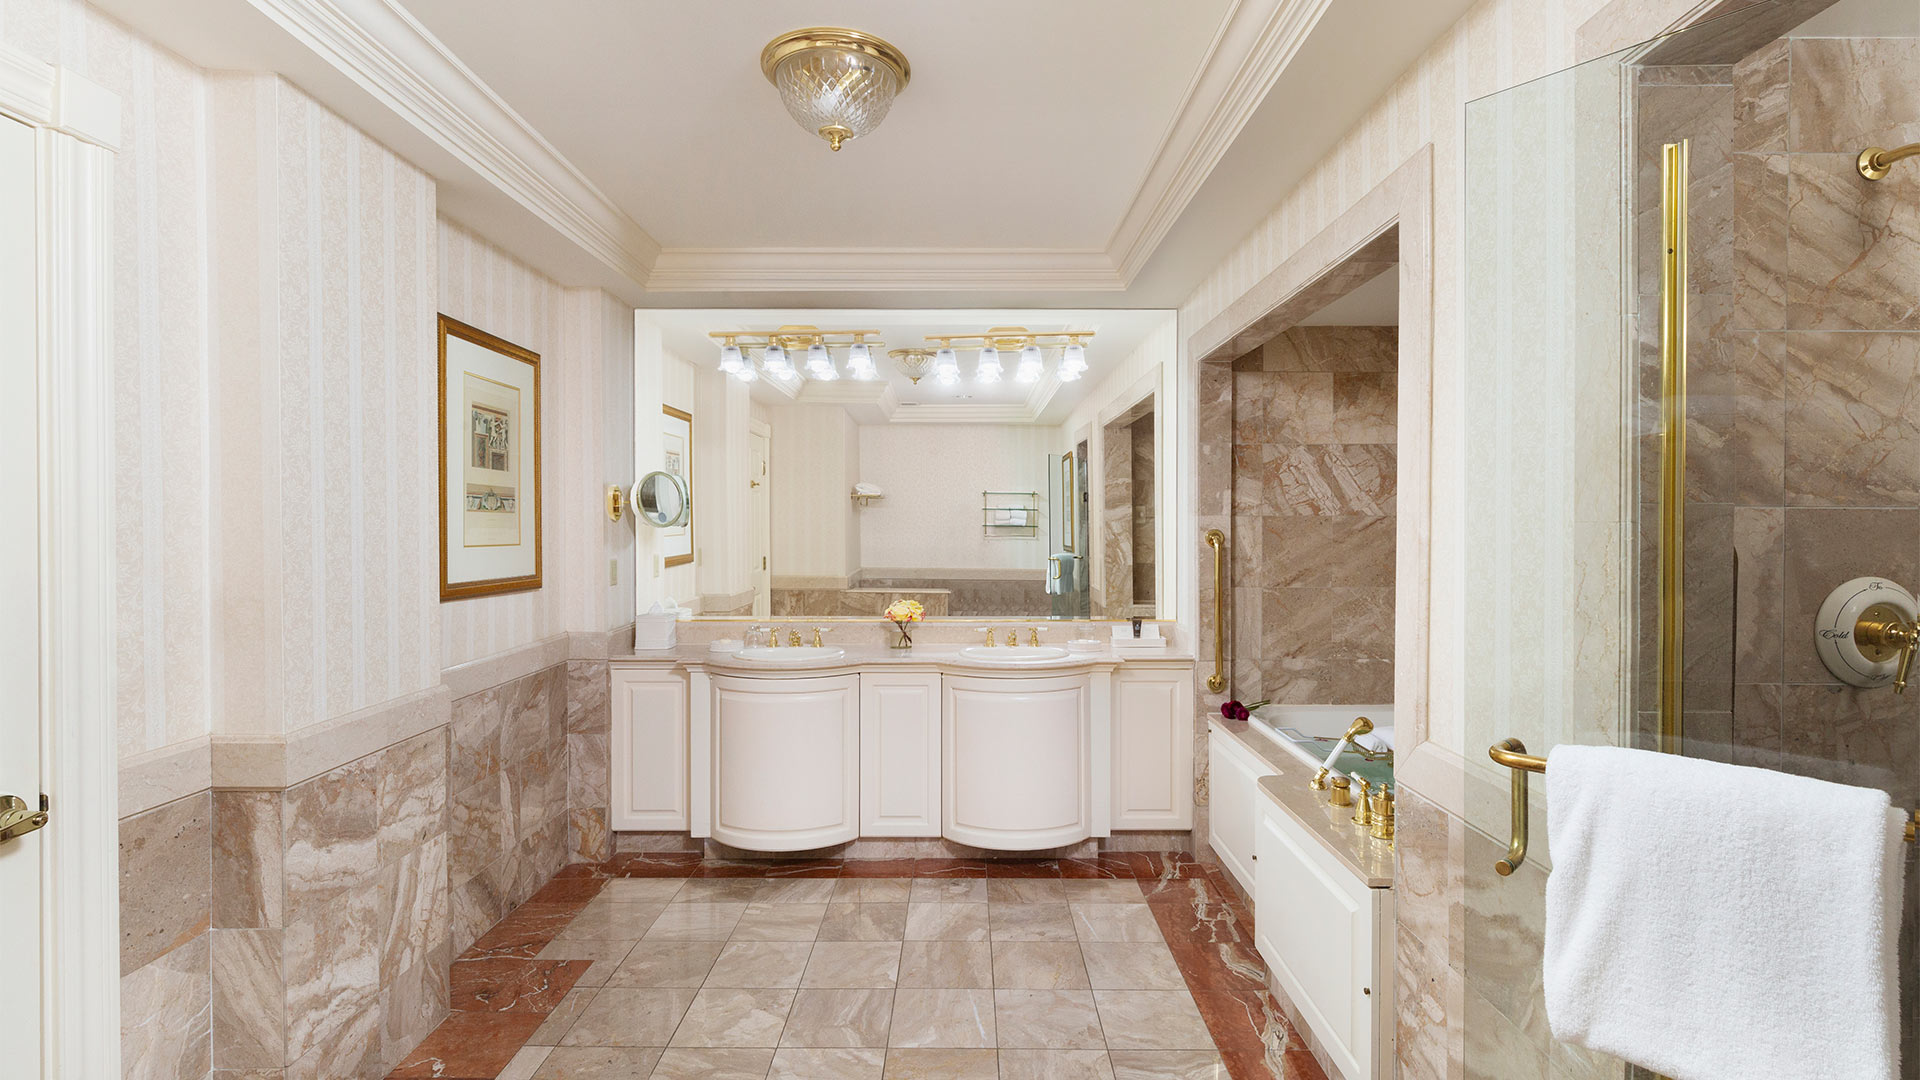 interior shot of a bathroom. the colors are a neutral beige. There is an elegant double sink with a large mirror and a shower and bath combination to the right of the sinks.